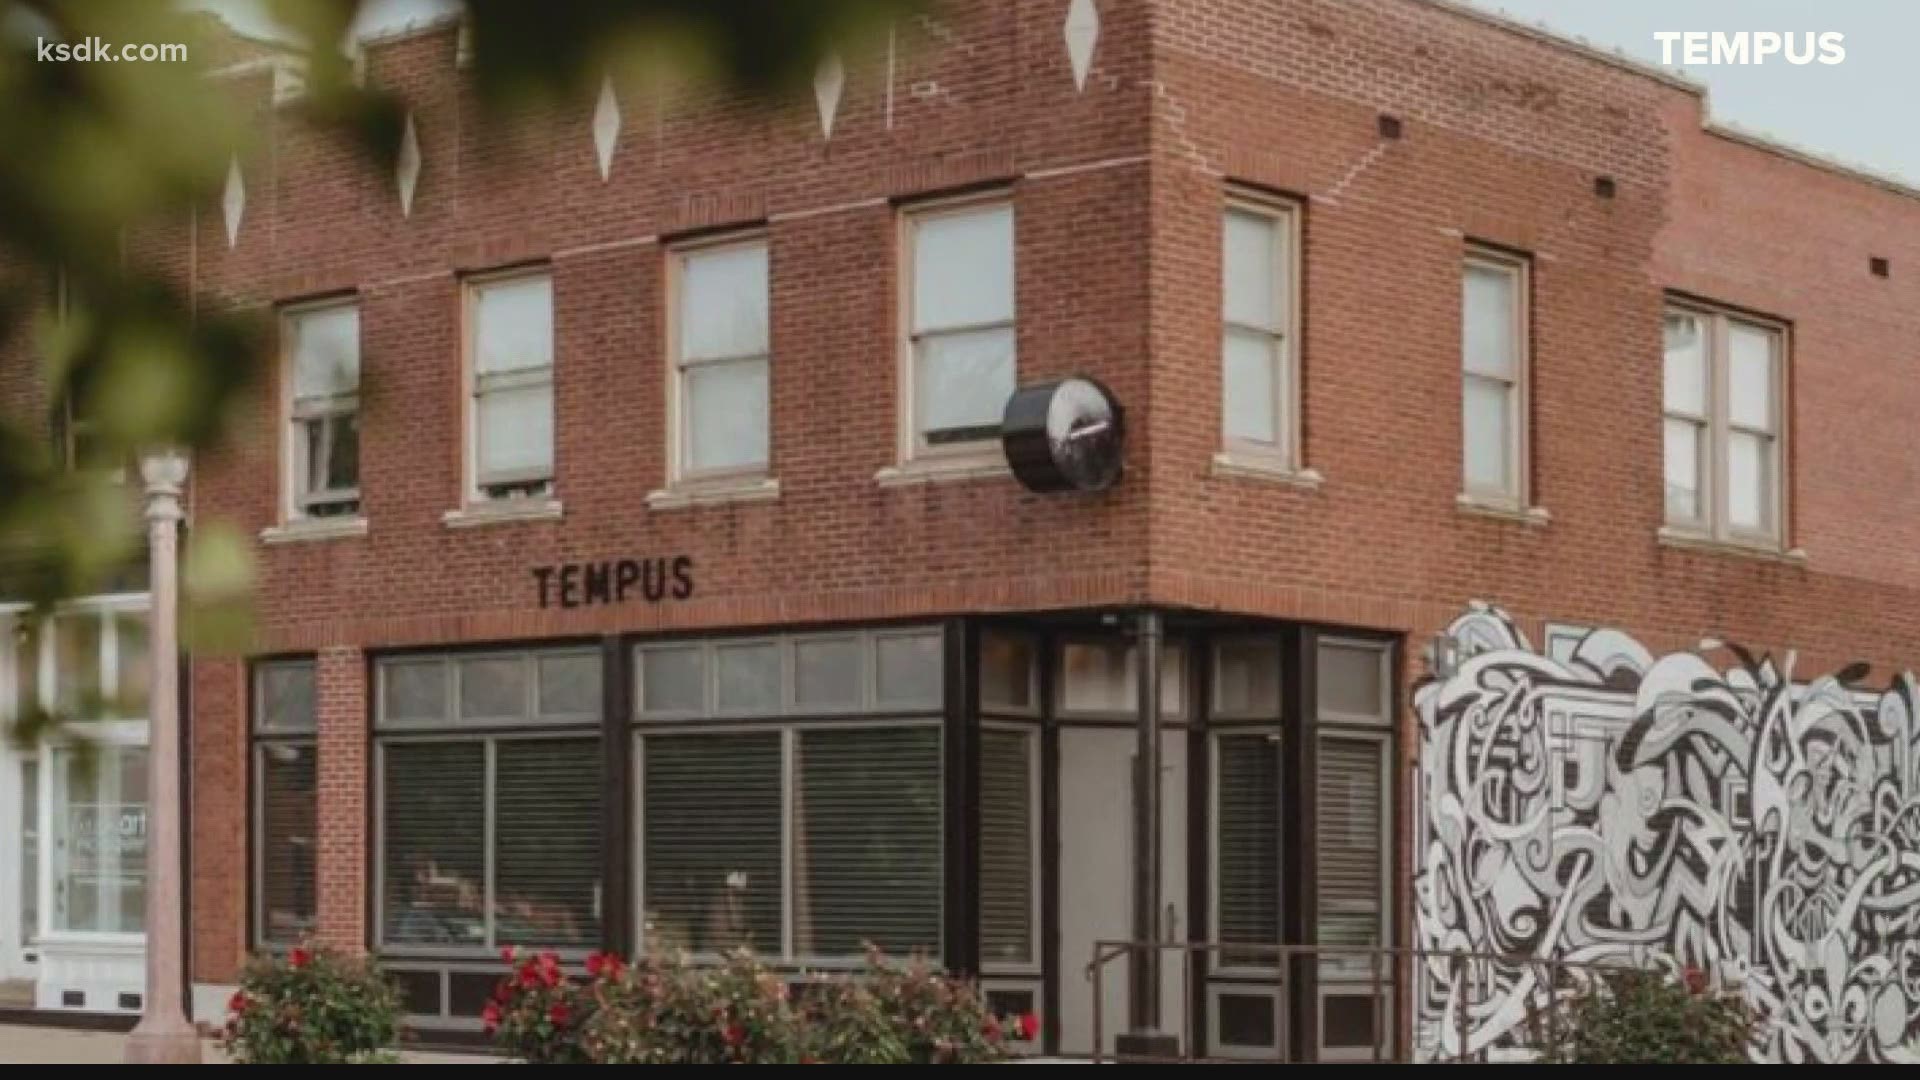 Tempus has only been open for six weeks but it's already getting national recognition.